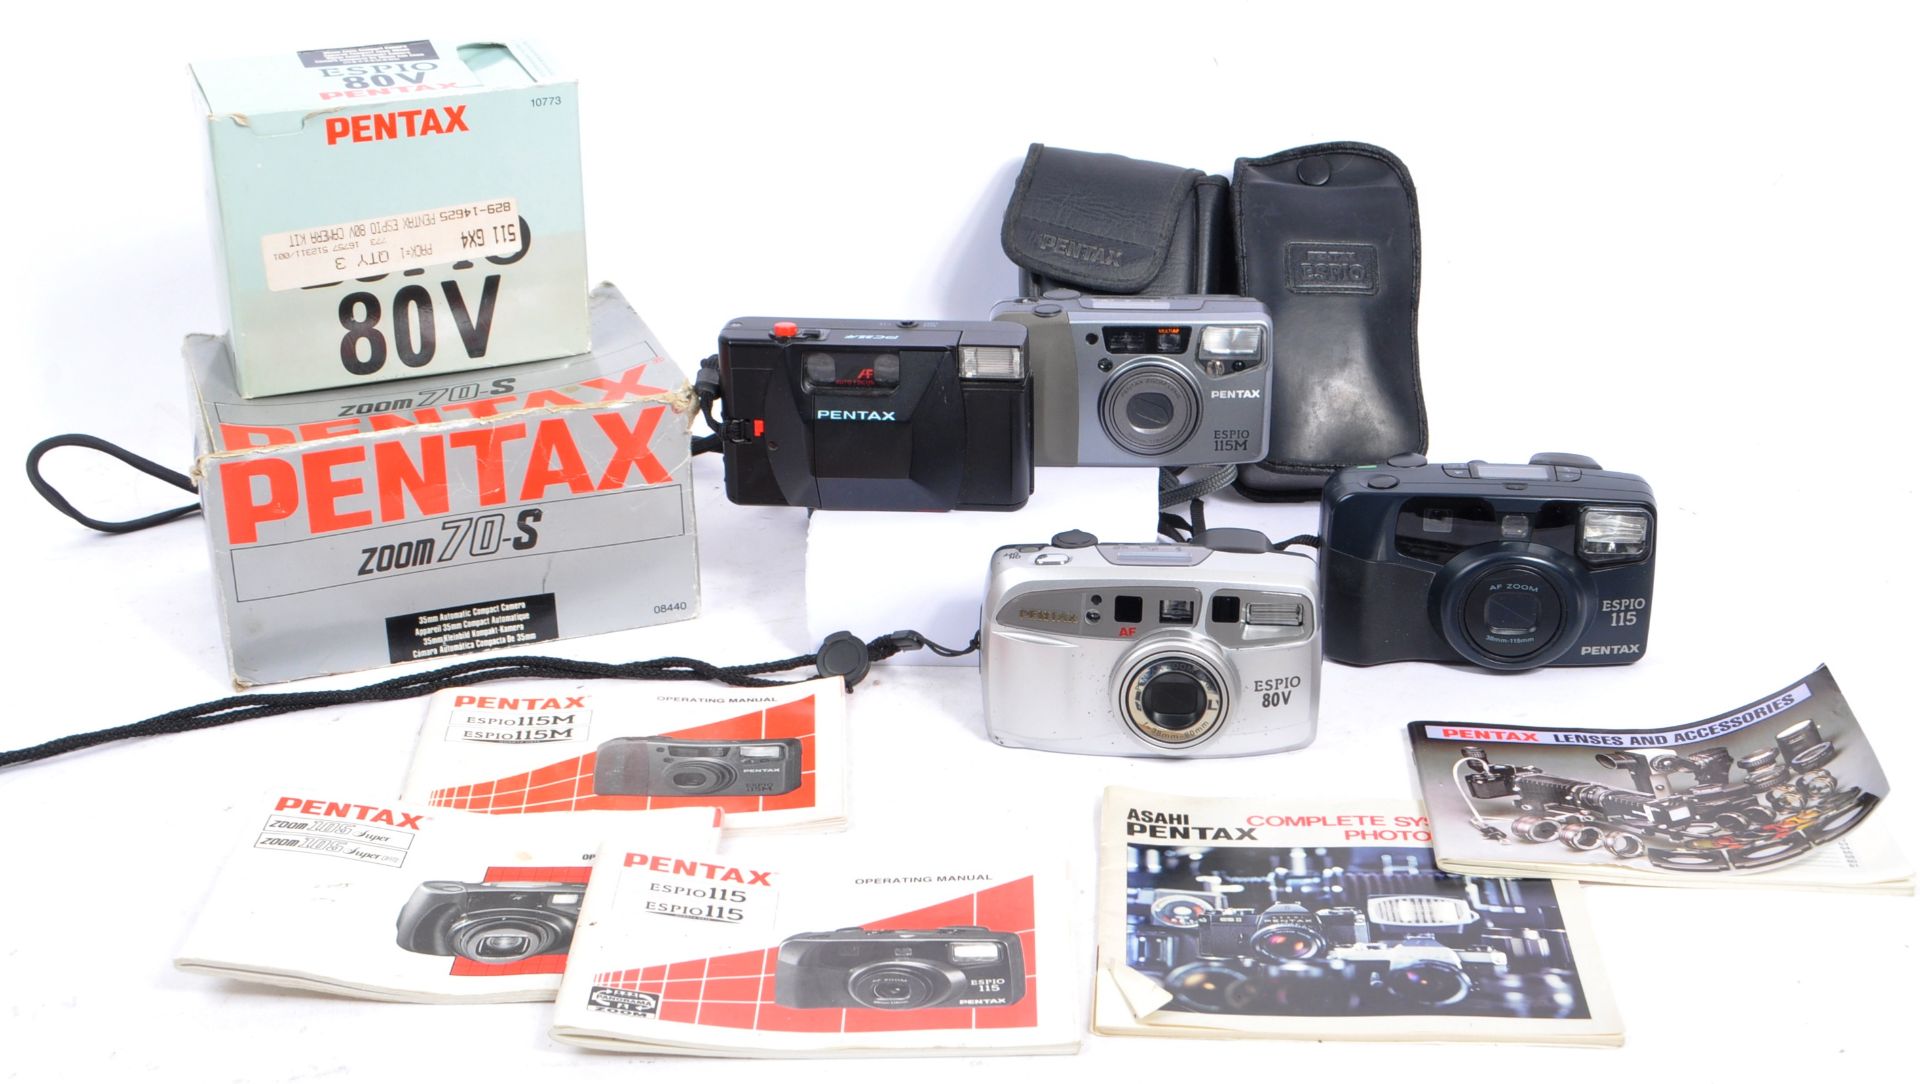 COLLECTION OF LATE 20TH CENTURY PENTAX COMPACT CAMERAS